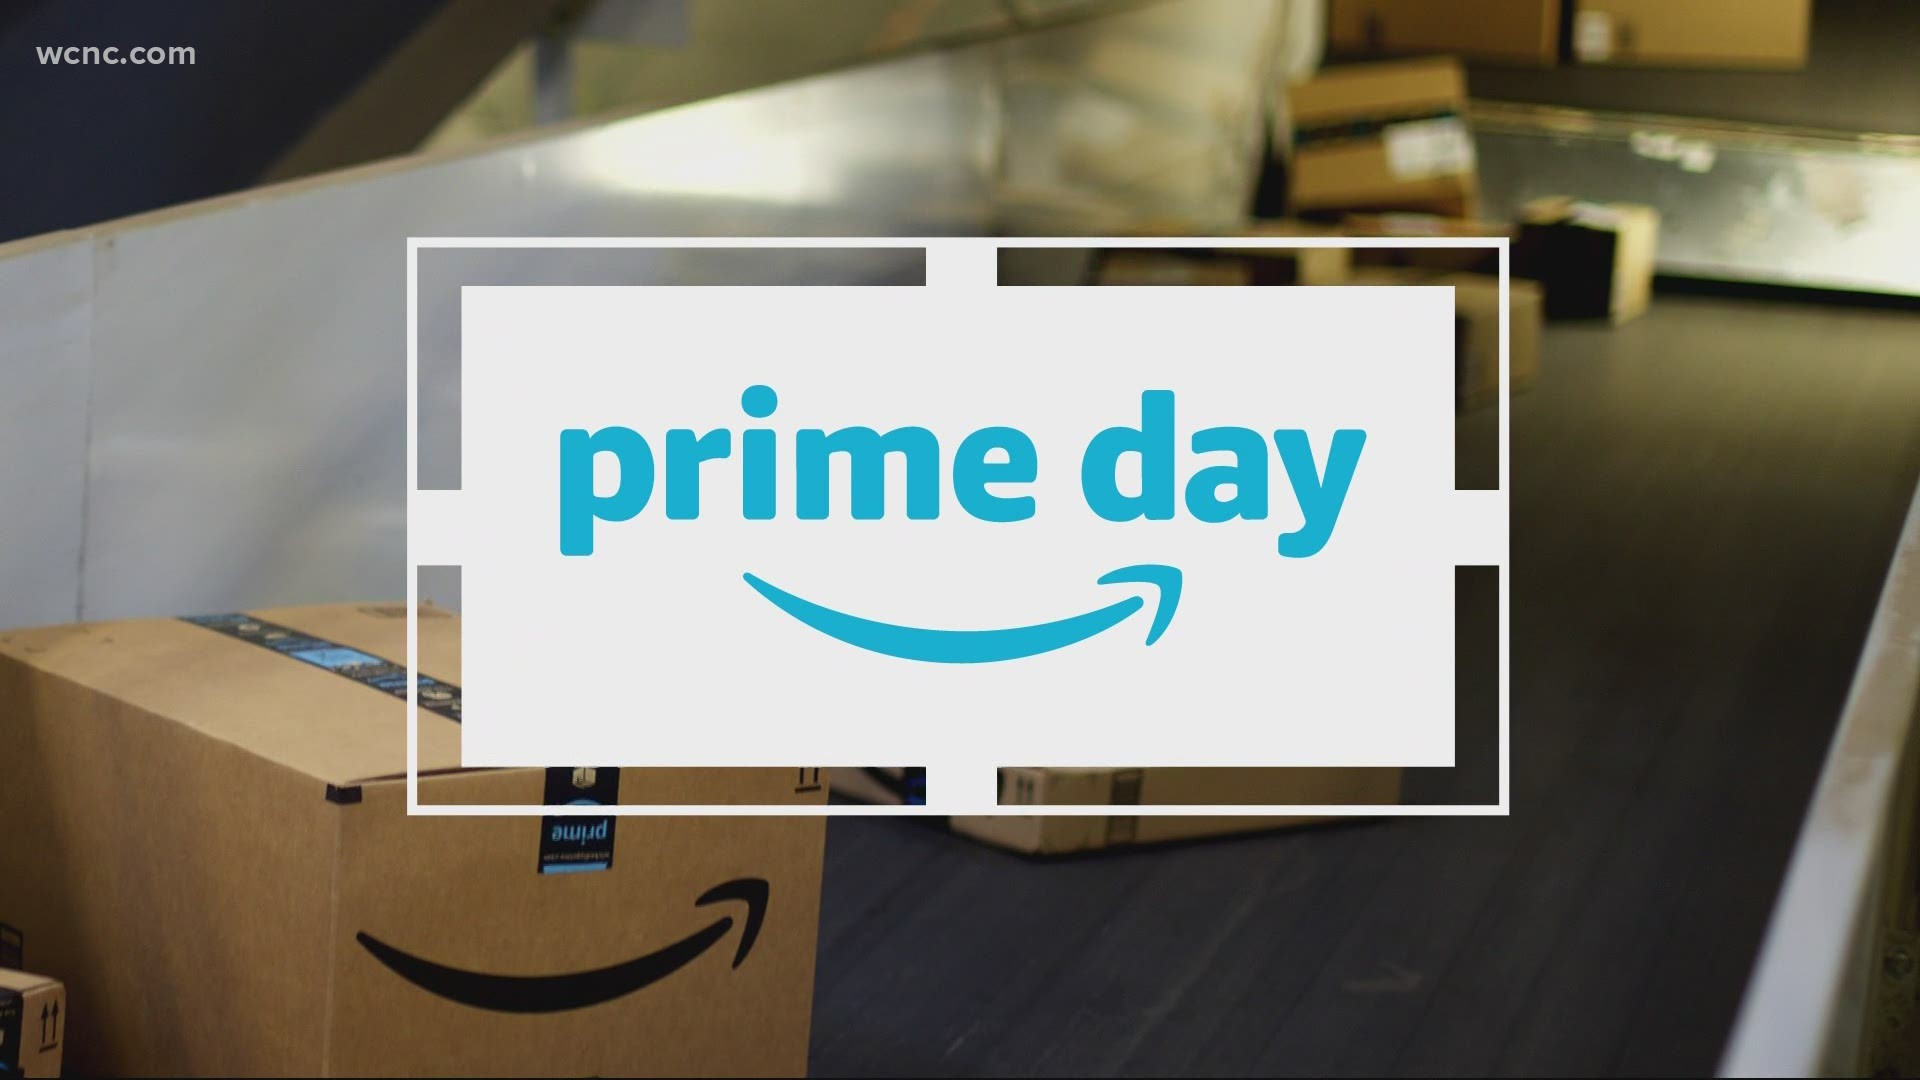 Experts predict Monday's Prime Day will surpass  last year’s Cyber Monday levels